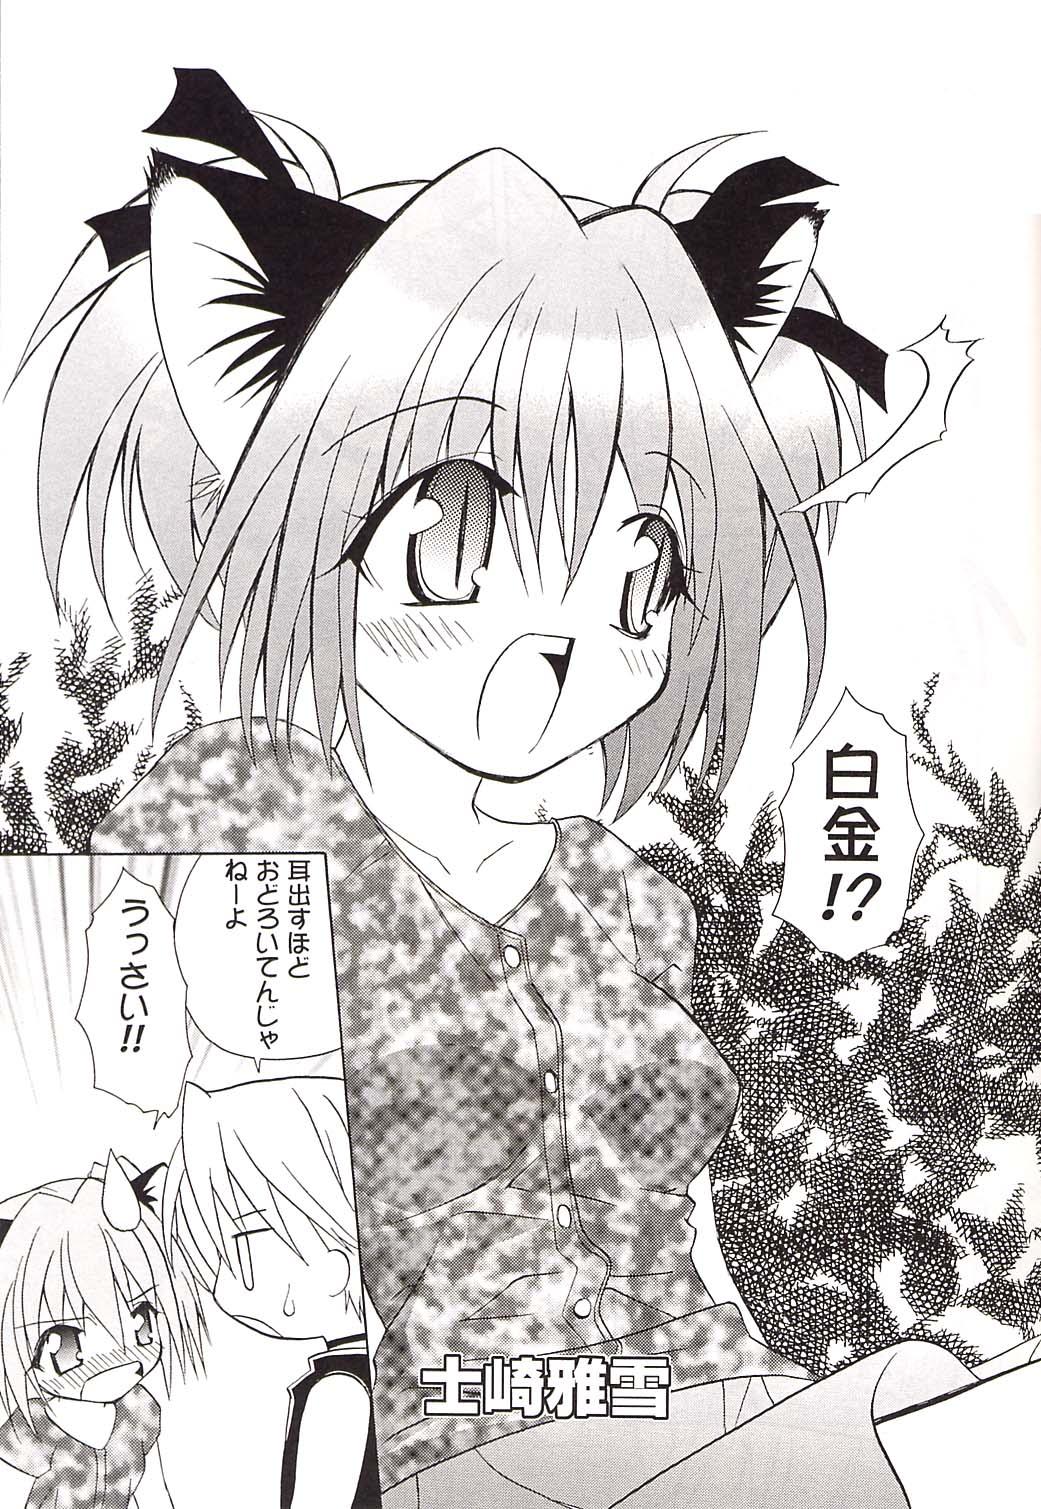 Anal Play Strawberry sex - Tokyo mew mew Gays - Page 6